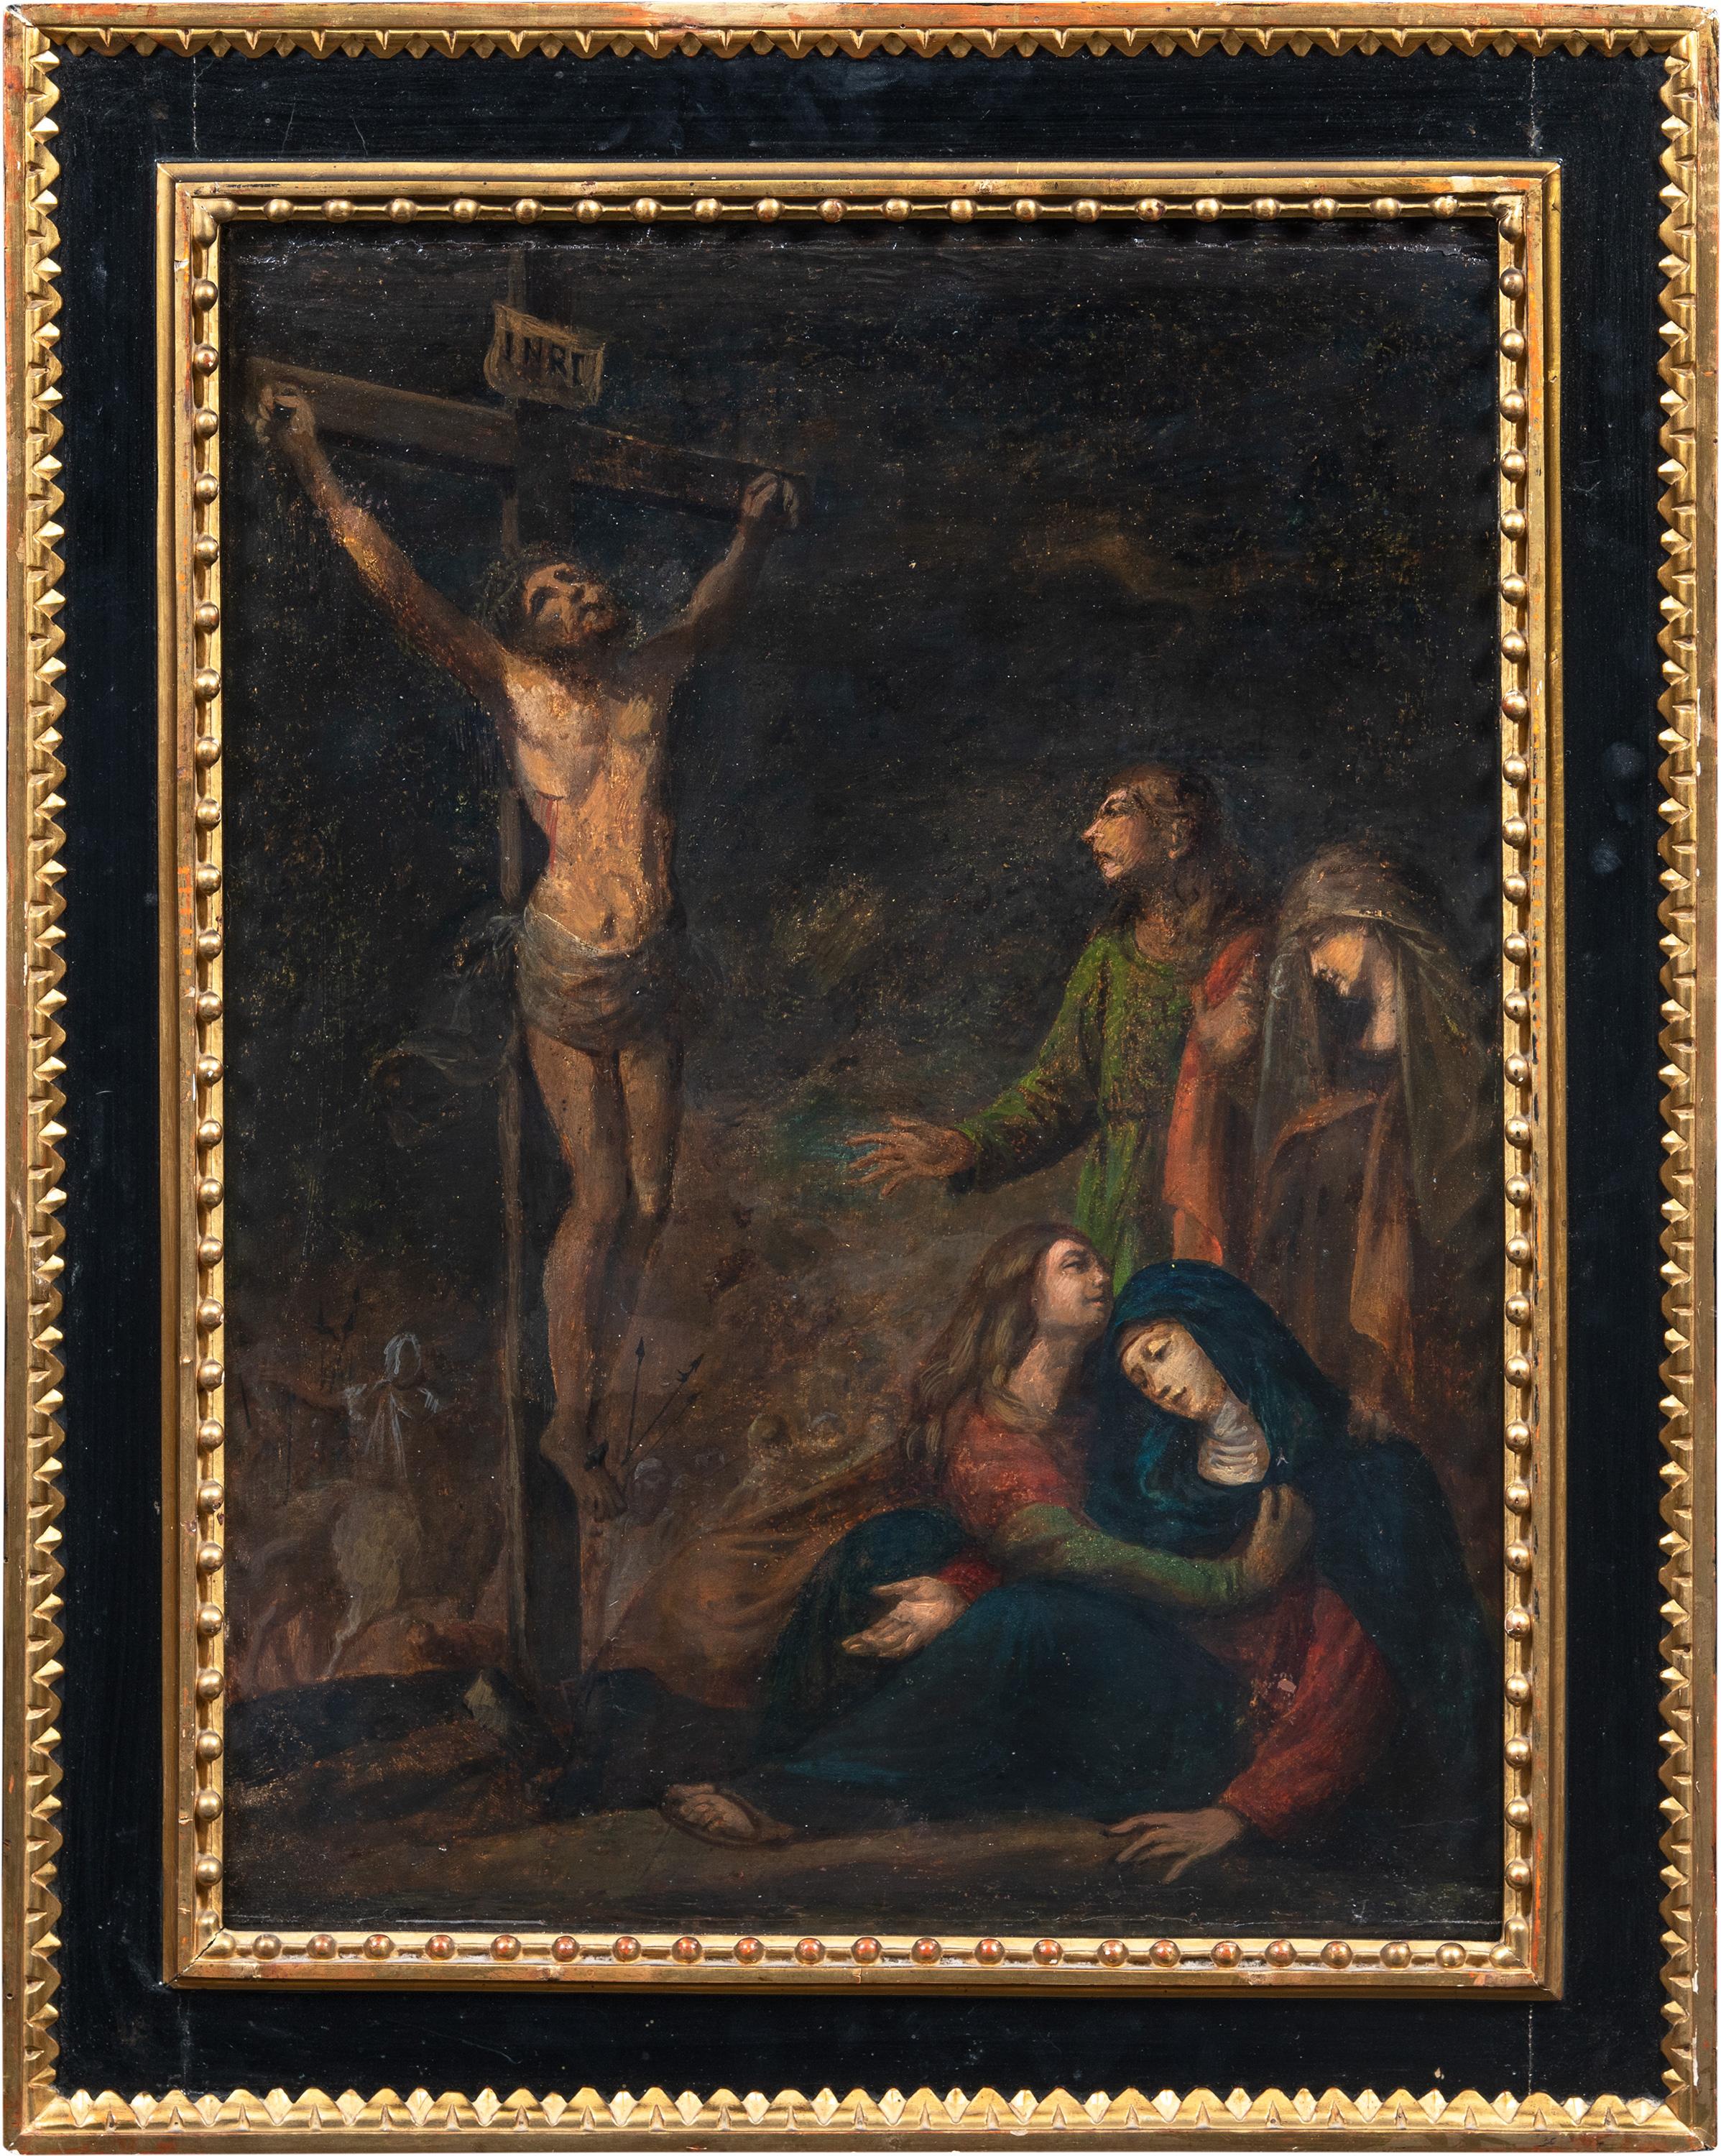 Unknown Figurative Painting - 17th century Italian figure painting - Crucifixion - Oil on panel Italy